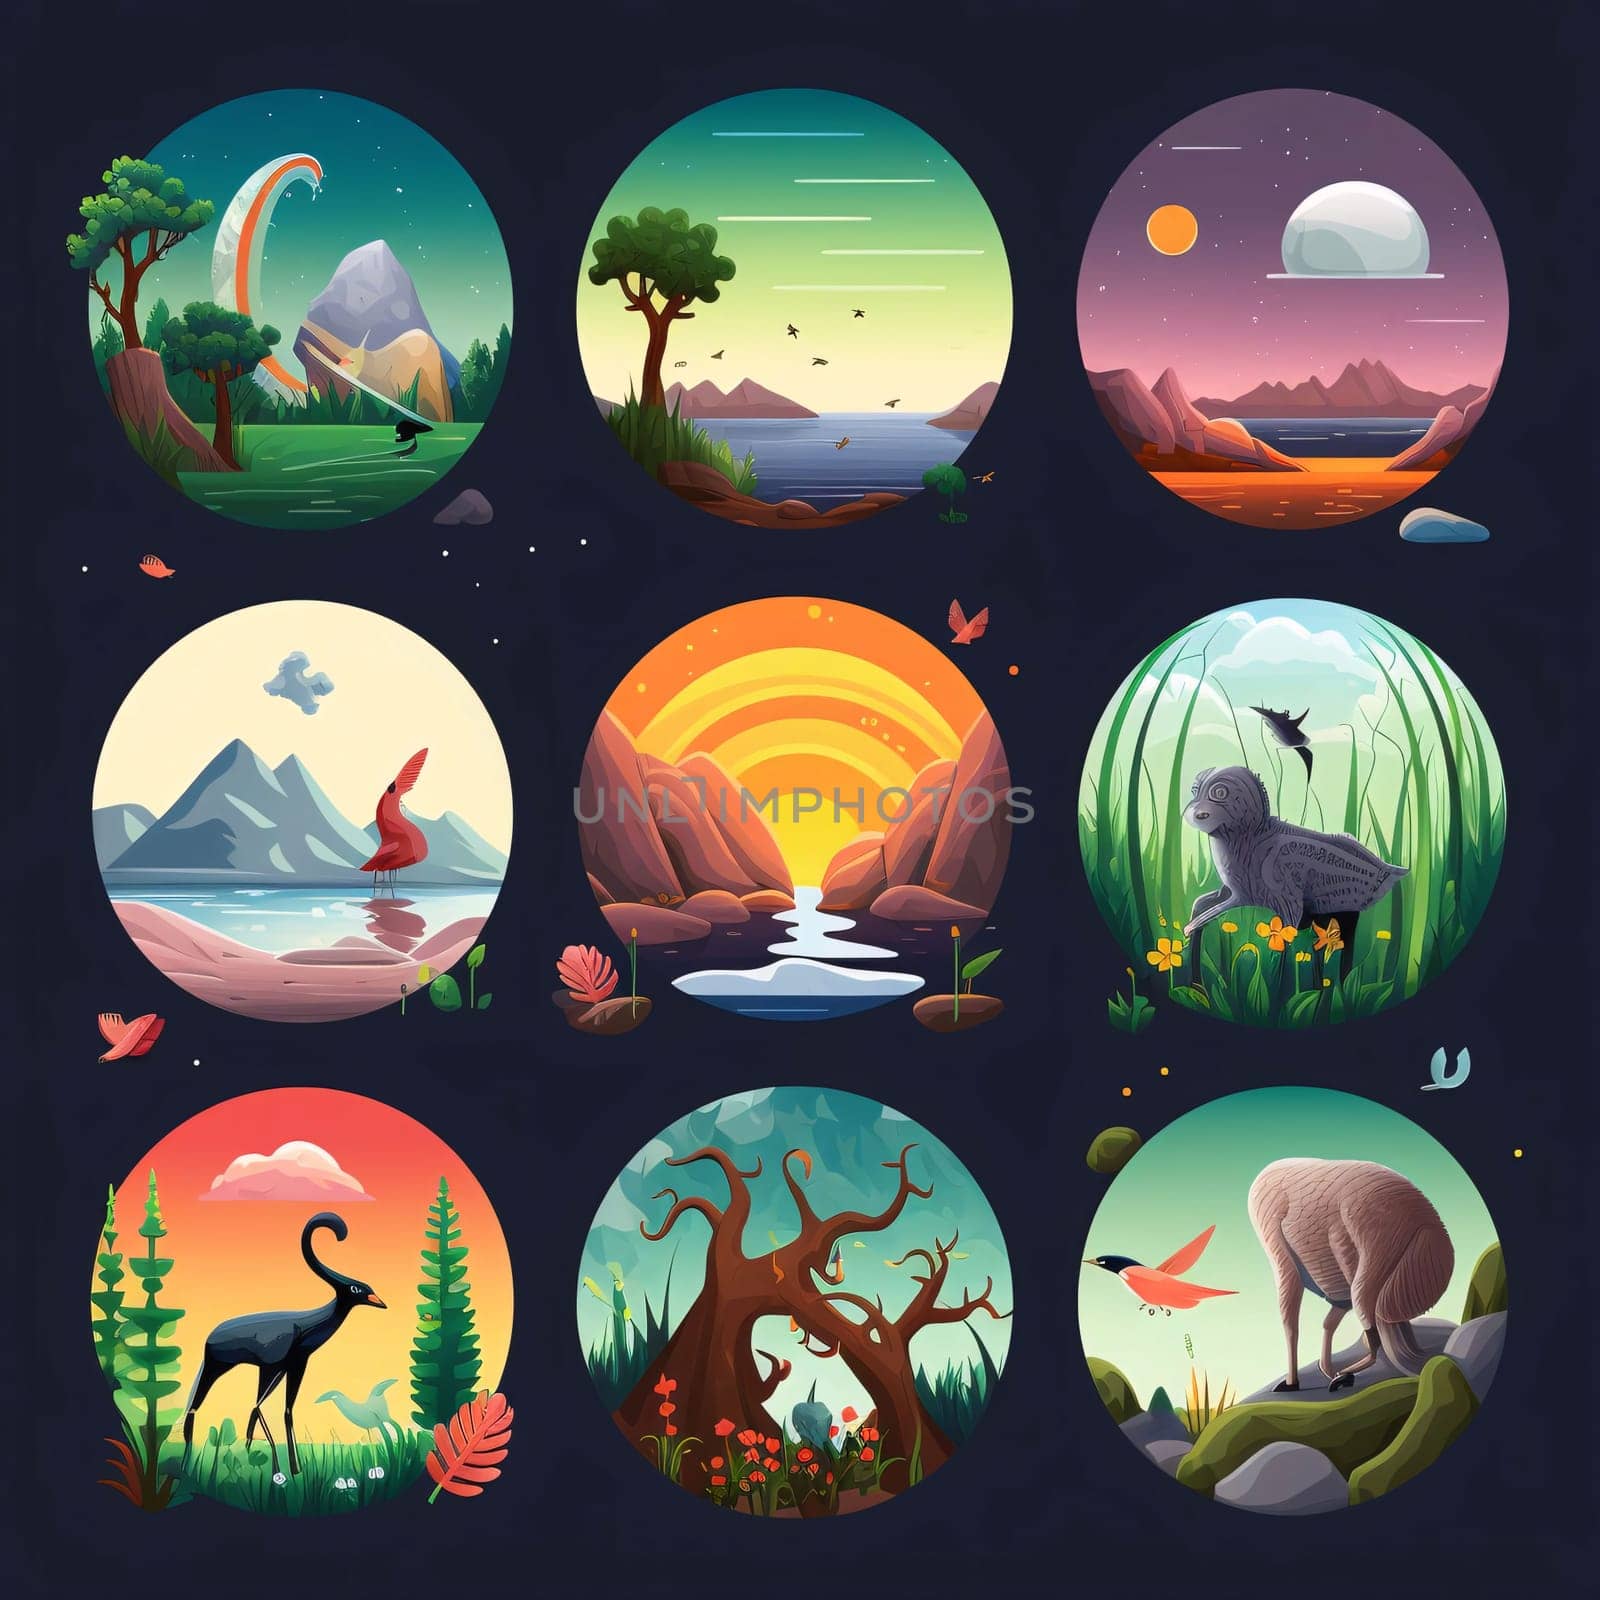 New icons collection: Vector set of cartoon wild animals in the forest. Illustration of wild animals in the nature.